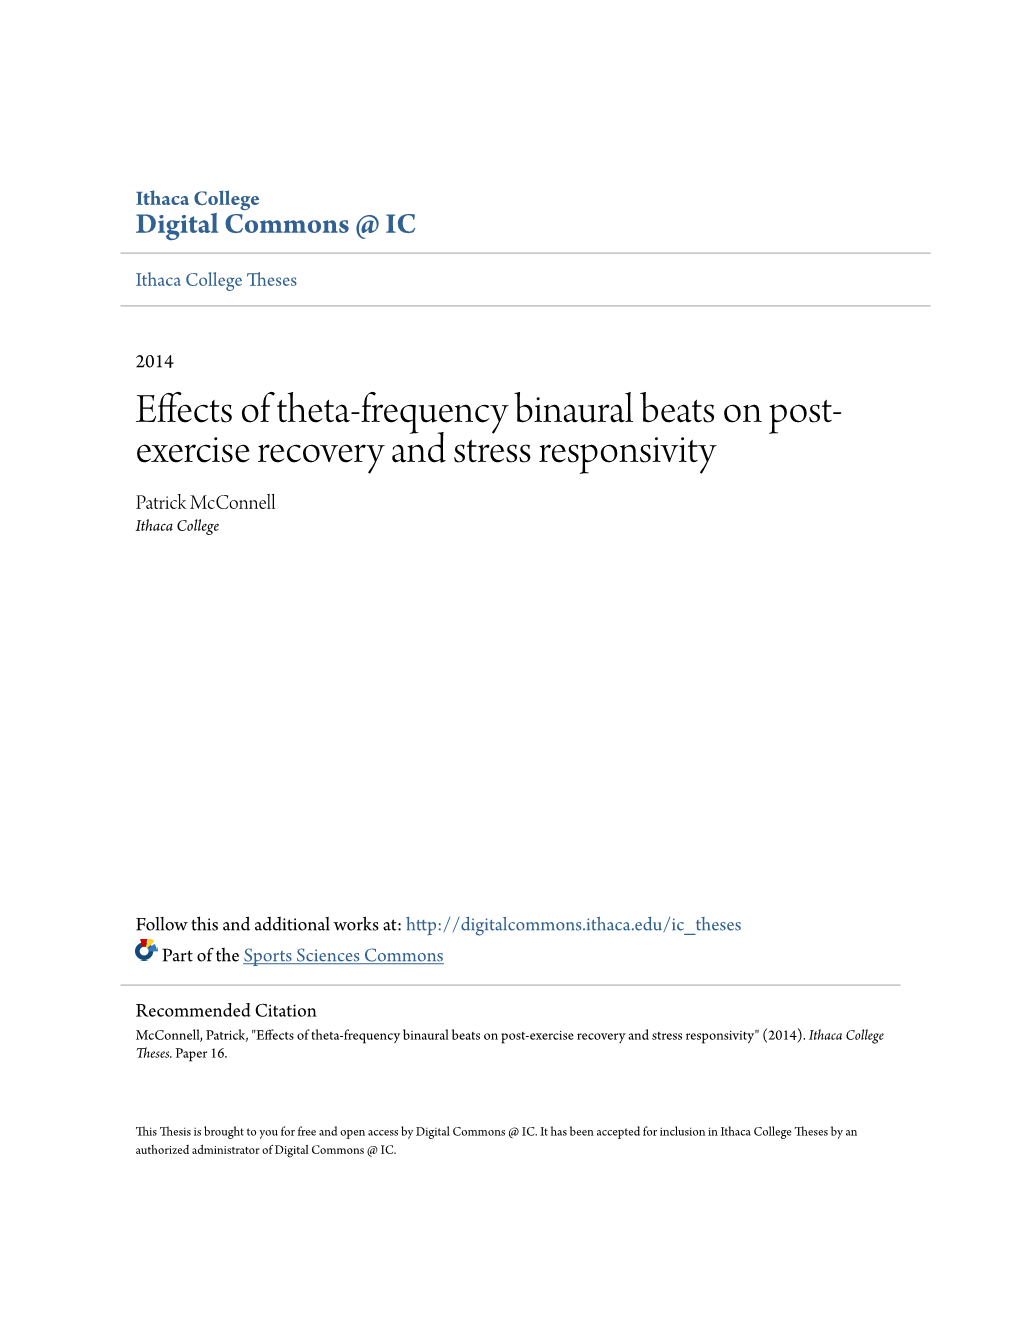 Effects of Theta-Frequency Binaural Beats on Post-Exercise Recovery and Stress Responsivity" (2014)